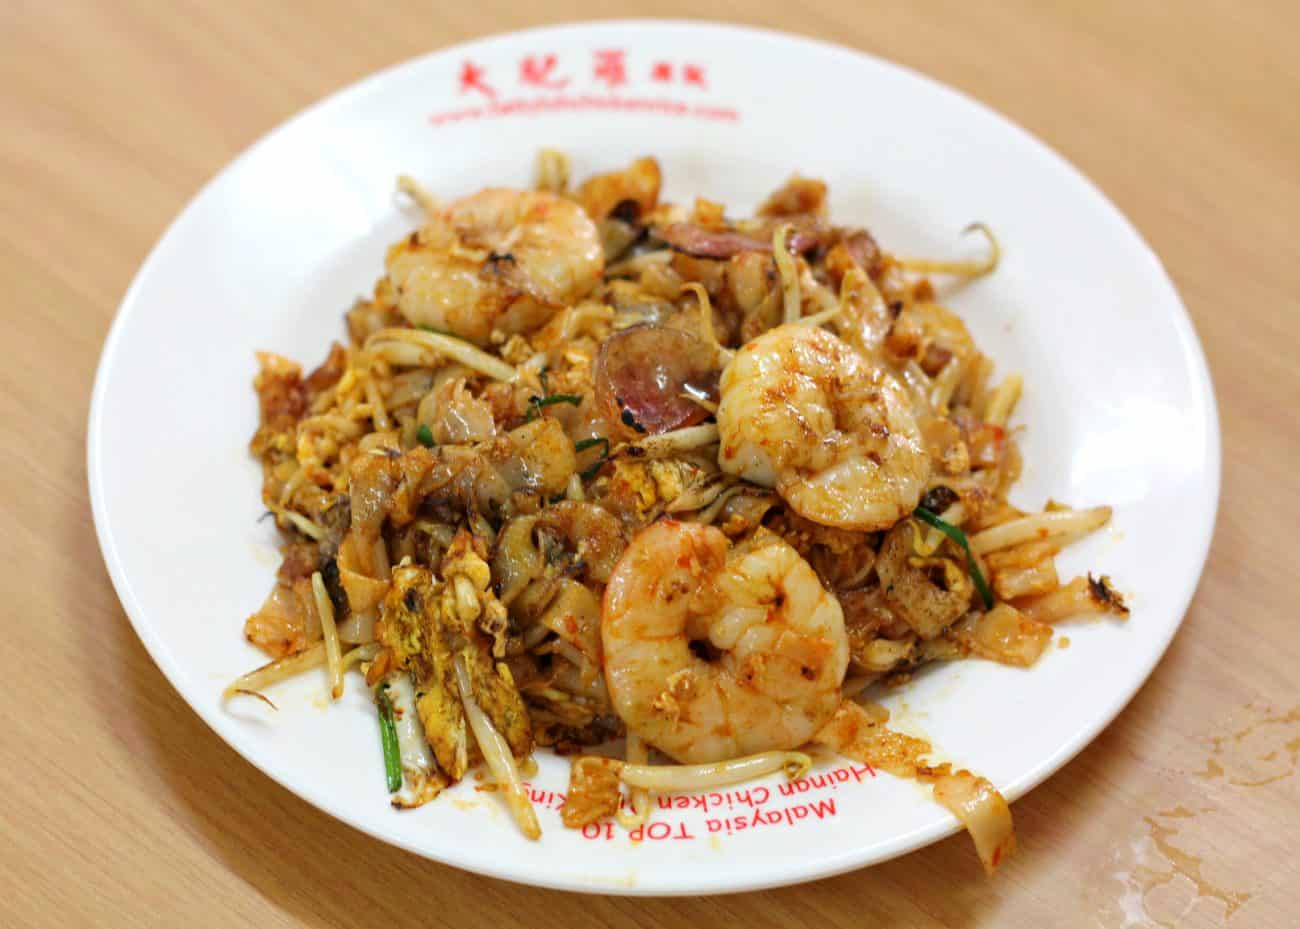 M'sian Sparks Debate Over Wet Versus Dry Char Kuey Teow on Social Media - WORLD OF BUZZ